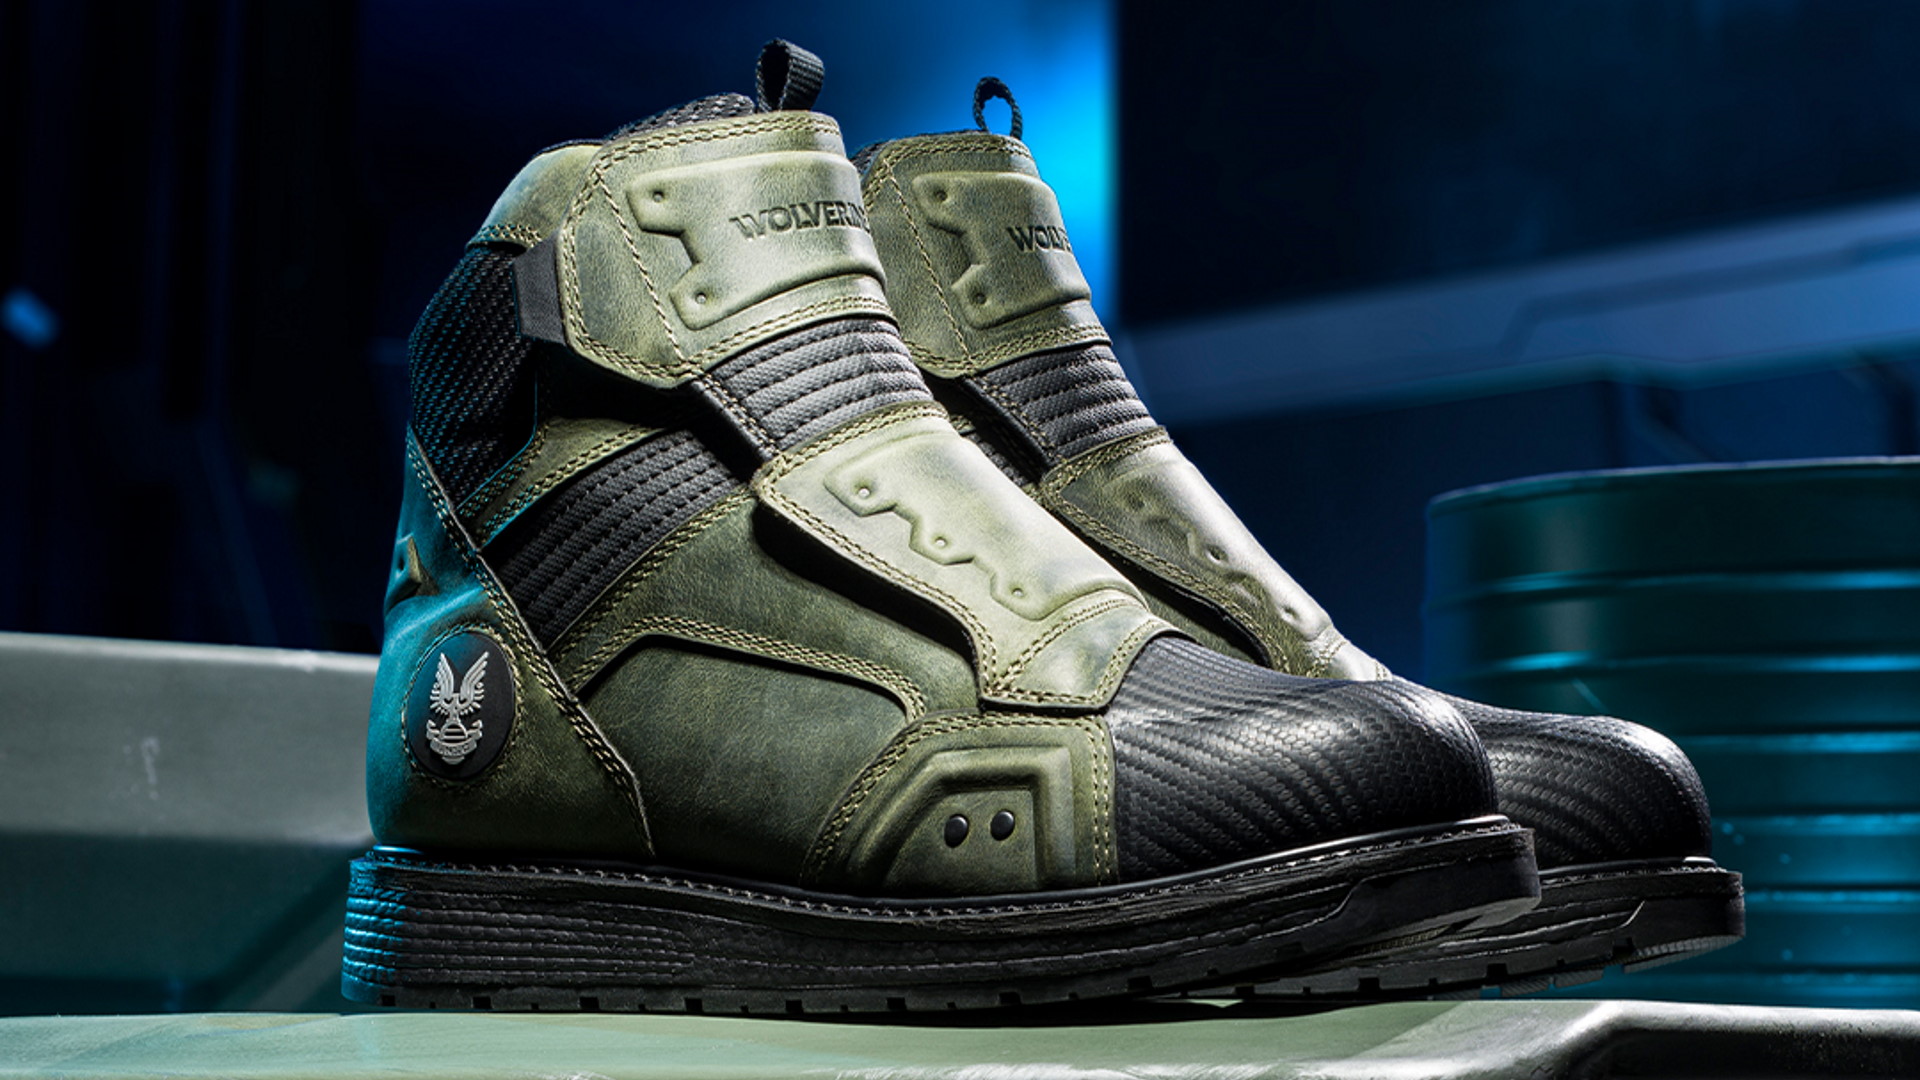 Master Chief boots